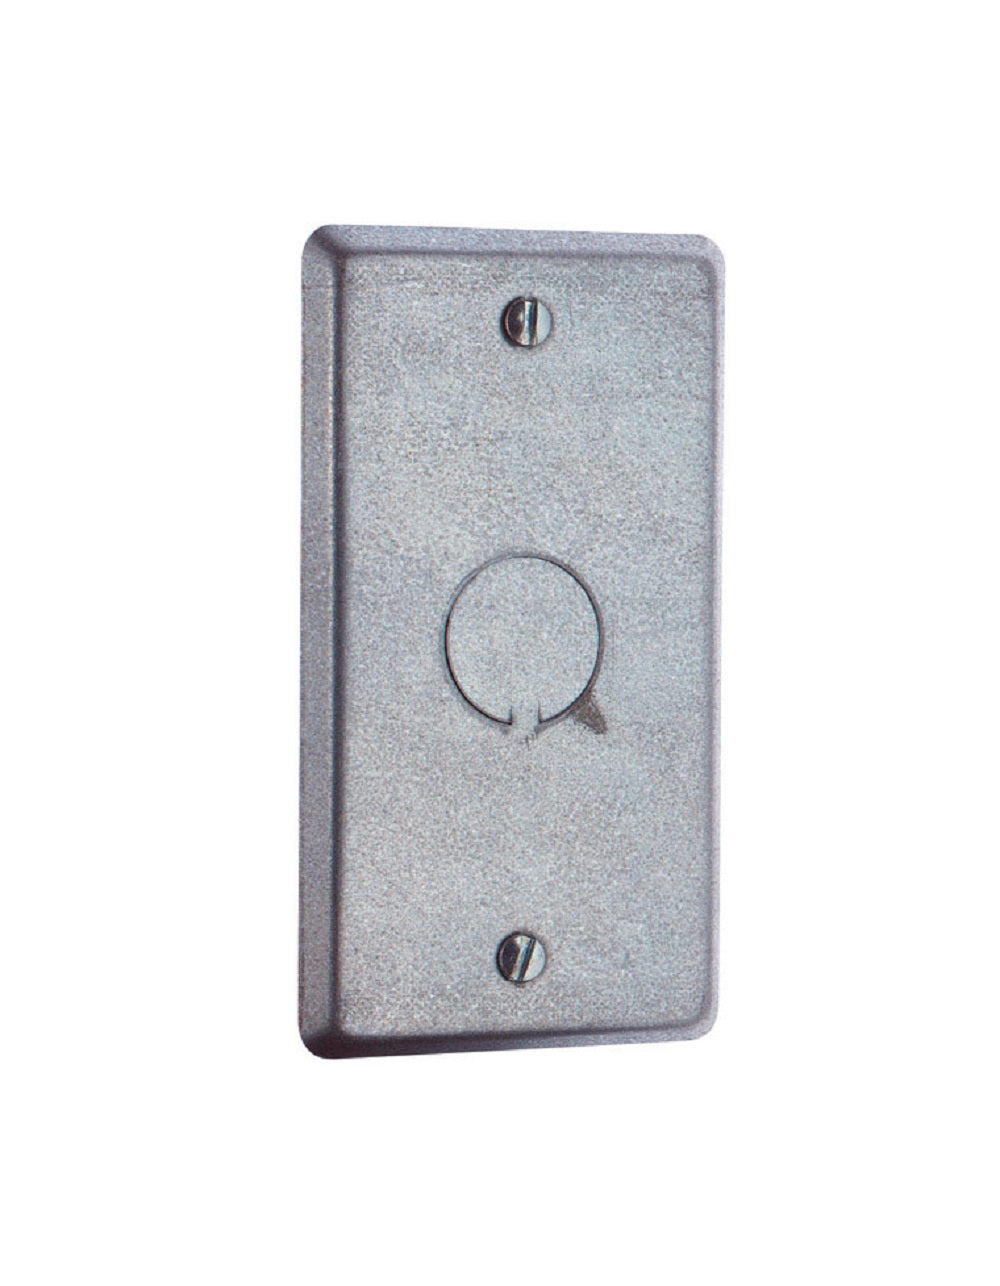 Steel City 58 C 6 Outlet Box Cover, Steel, 1 gang